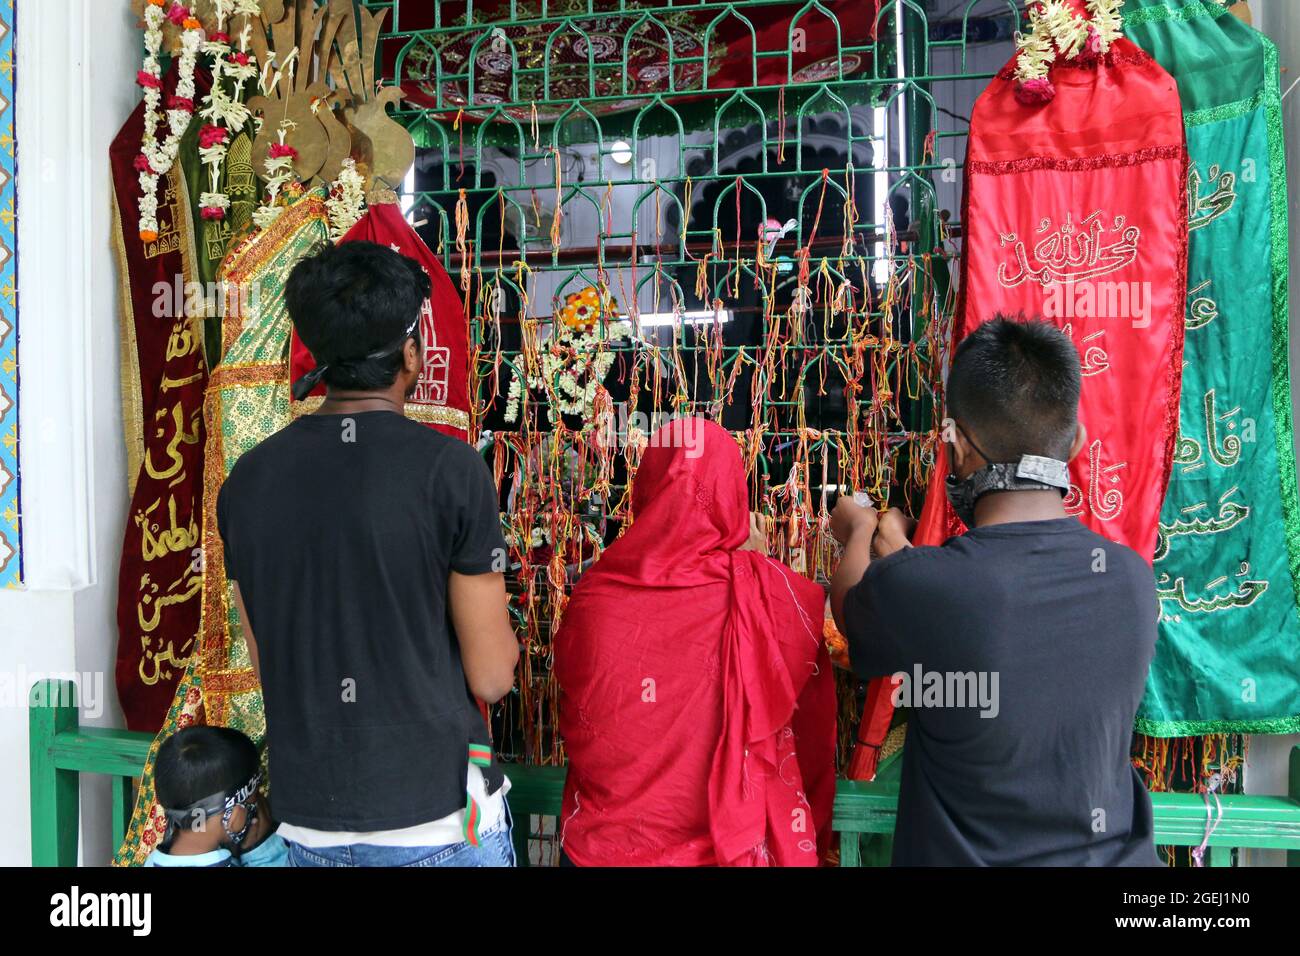 Dhaka, Bangladesh, August 20: shias persons pray  during  the day of mourning to commemorate Ashura Day. The tenth day of Muharram is celebrated as Ashura, Shia muslims celebrate the day as mourning day to recalling the martyrdom of Prophet Hazrat Muhammad's grandson Hazrat Imam Hussain, his relatives and 72 supporters during the clash of Karbala on this day in the Hijri year of 61. Credit: Habibur Rahman / Eyepix Group/Alamy Live News Stock Photo